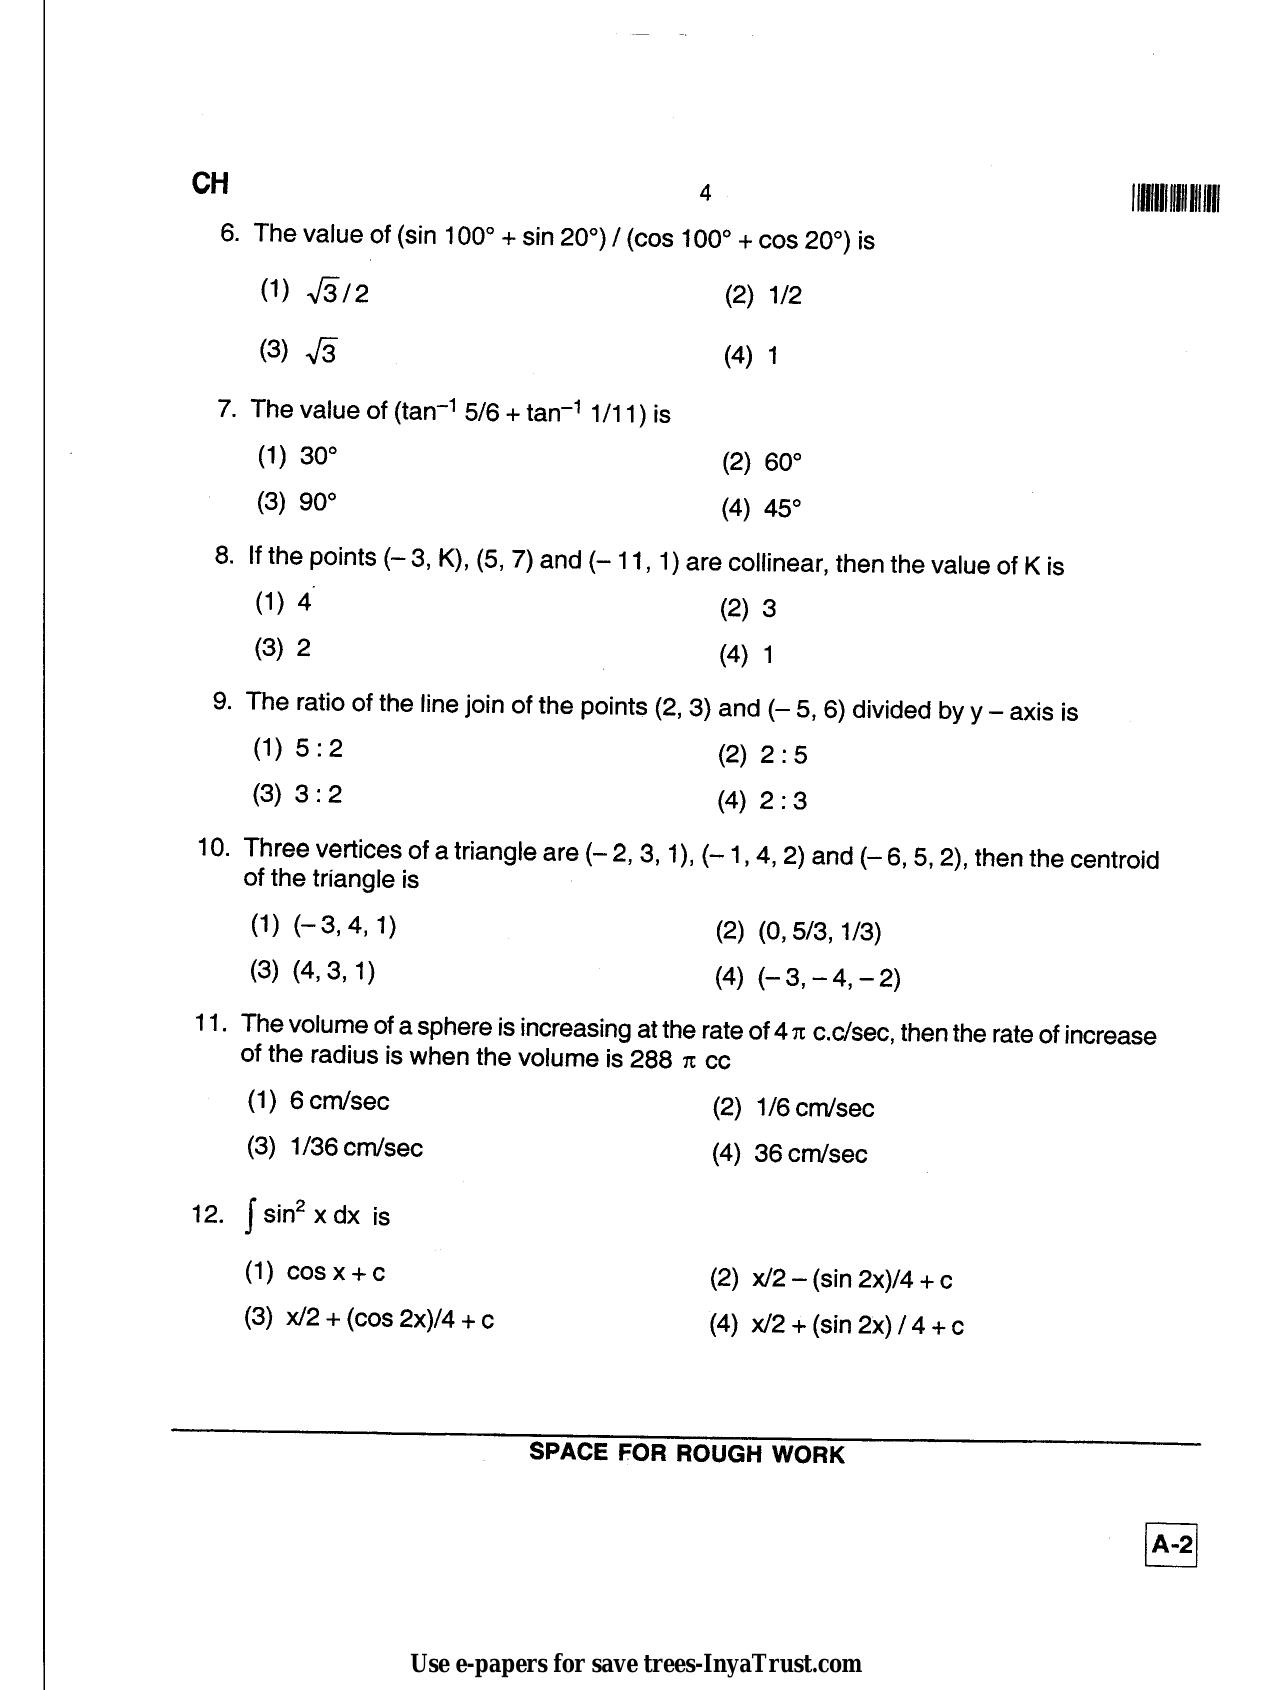 Karnataka Diploma CET- 2013 Chemical Engineering / Polymer Technology Question Paper - Page 4